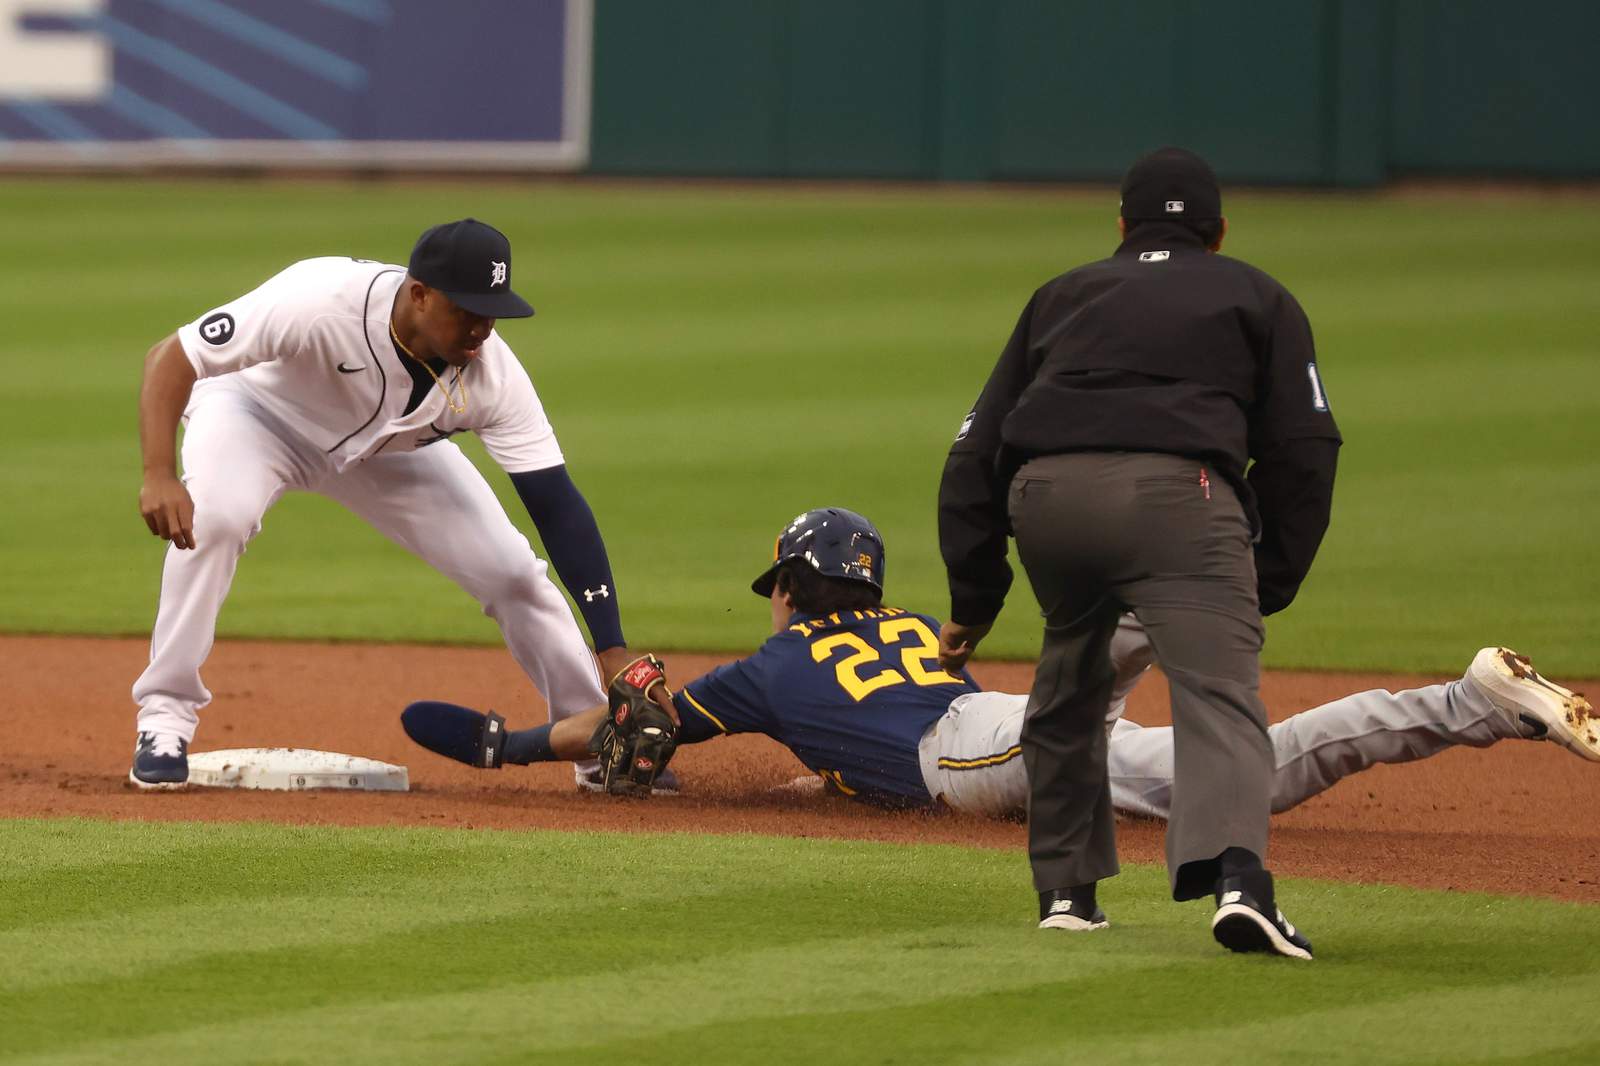 Heres how to watch Detroit Tigers vs. Milwaukee Brewers live today: Only on YouTube